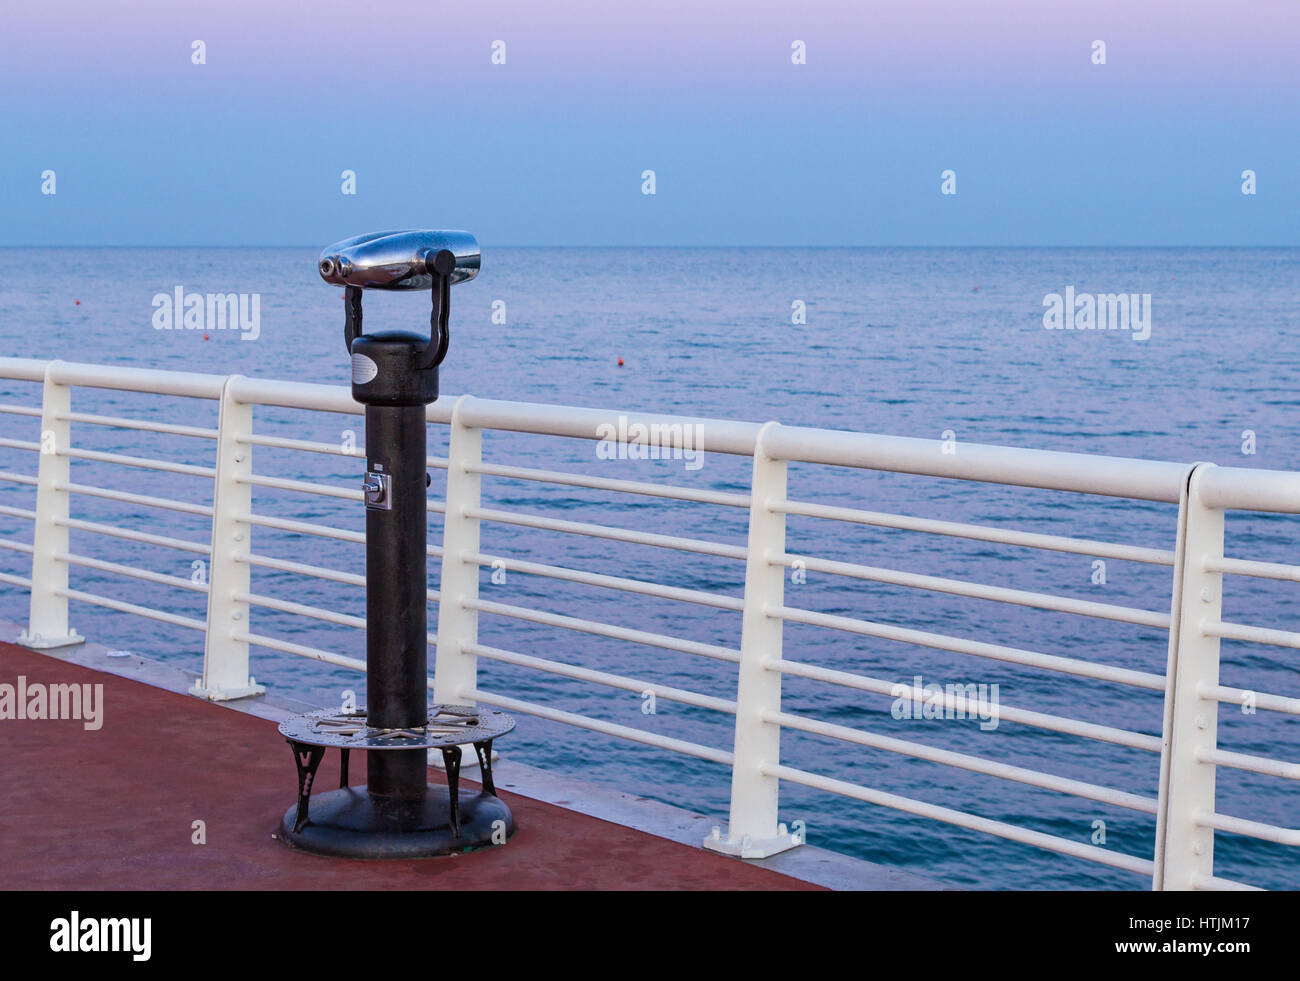 coin operated binoculars on a pier overlooking the sea Stock Photo